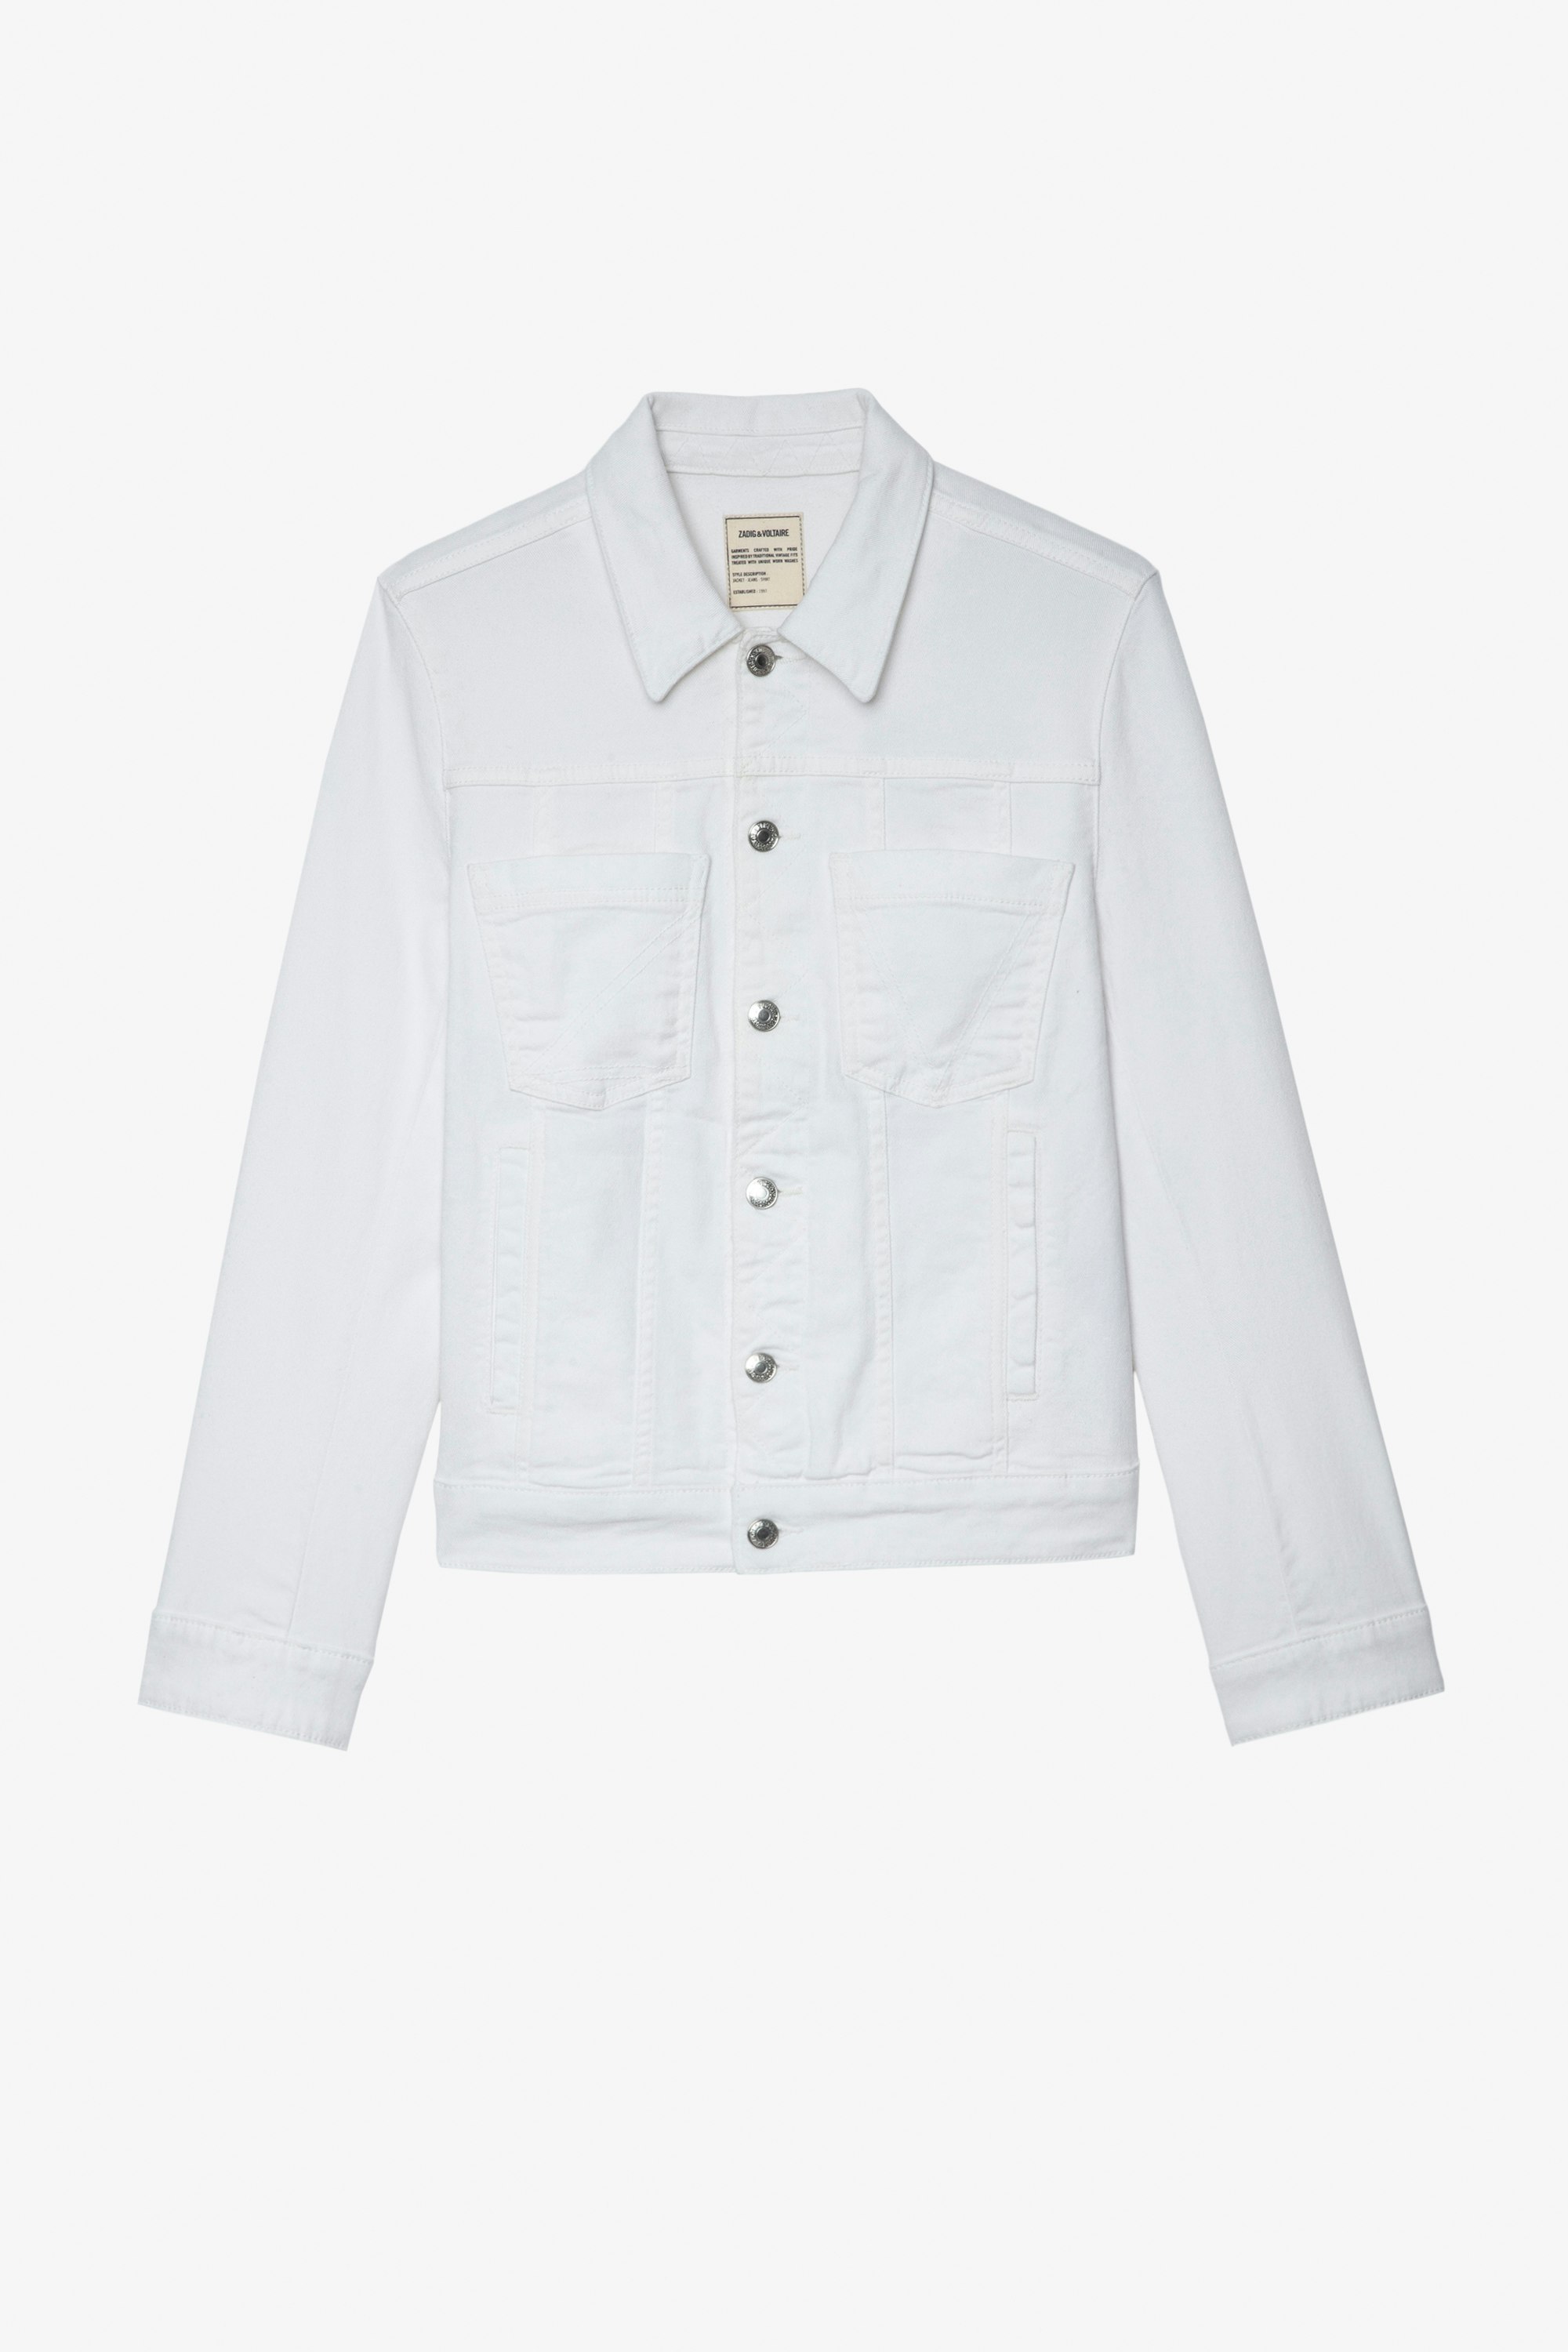 Kiomy Jacket Women's buttoned and zipped off-white denim jacket with "Act For Love" slogan on the back